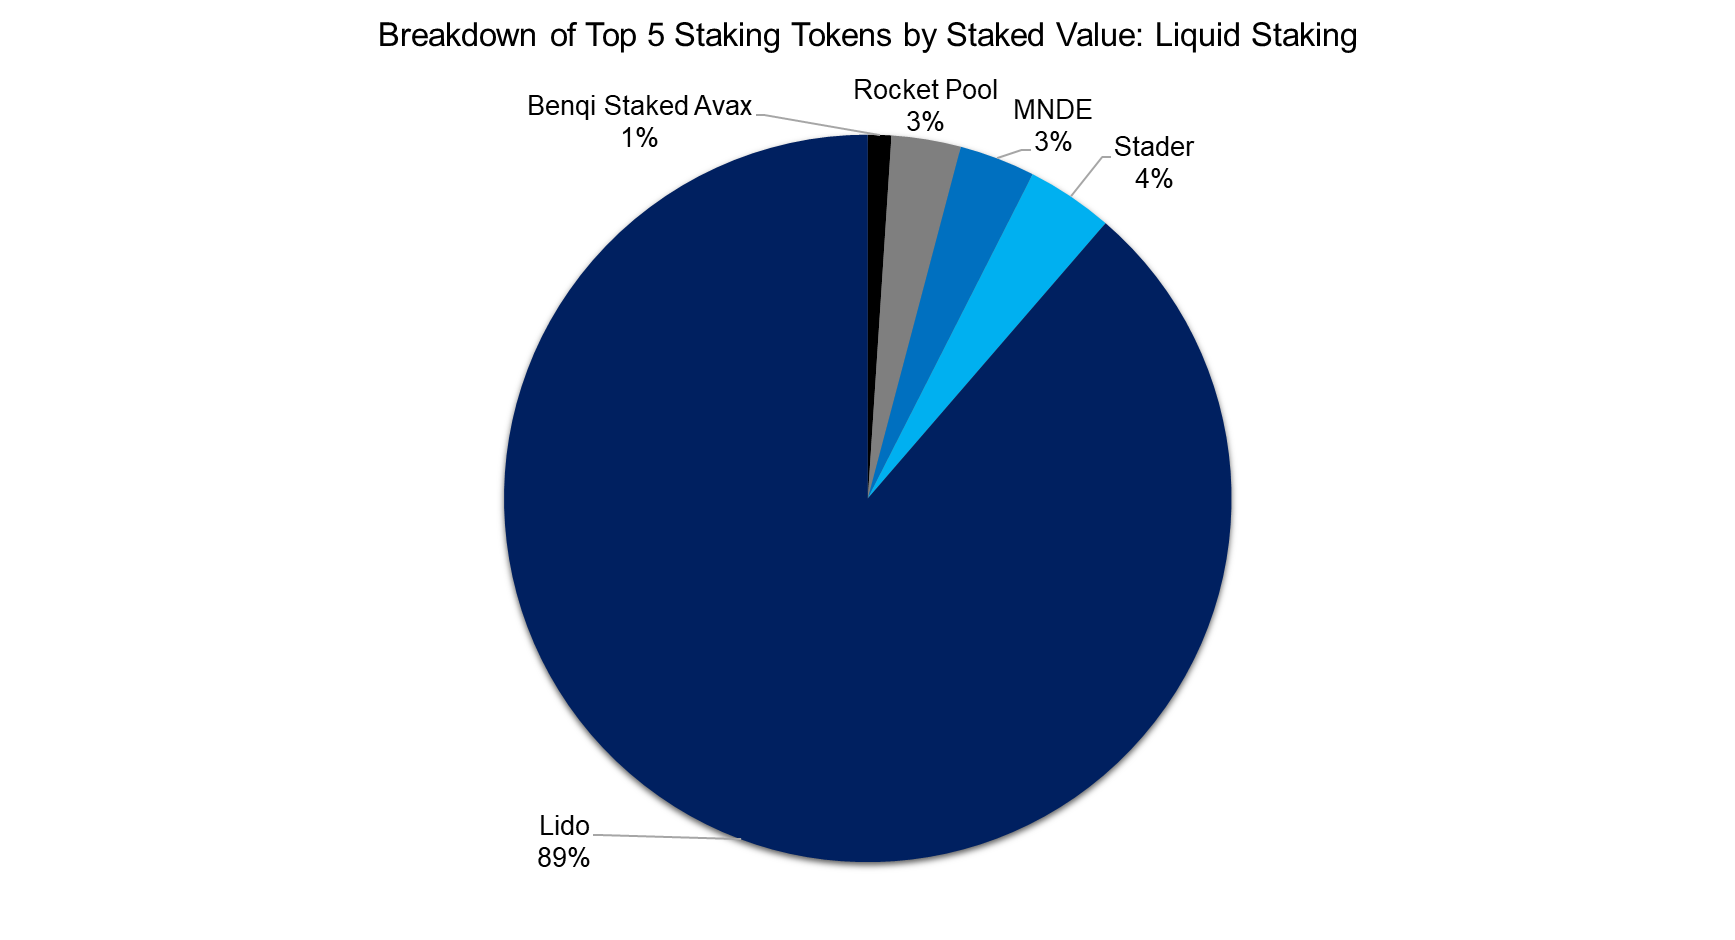 Breakdown of Top 5 Staking Tokens by Staked Value: Liquid Staking